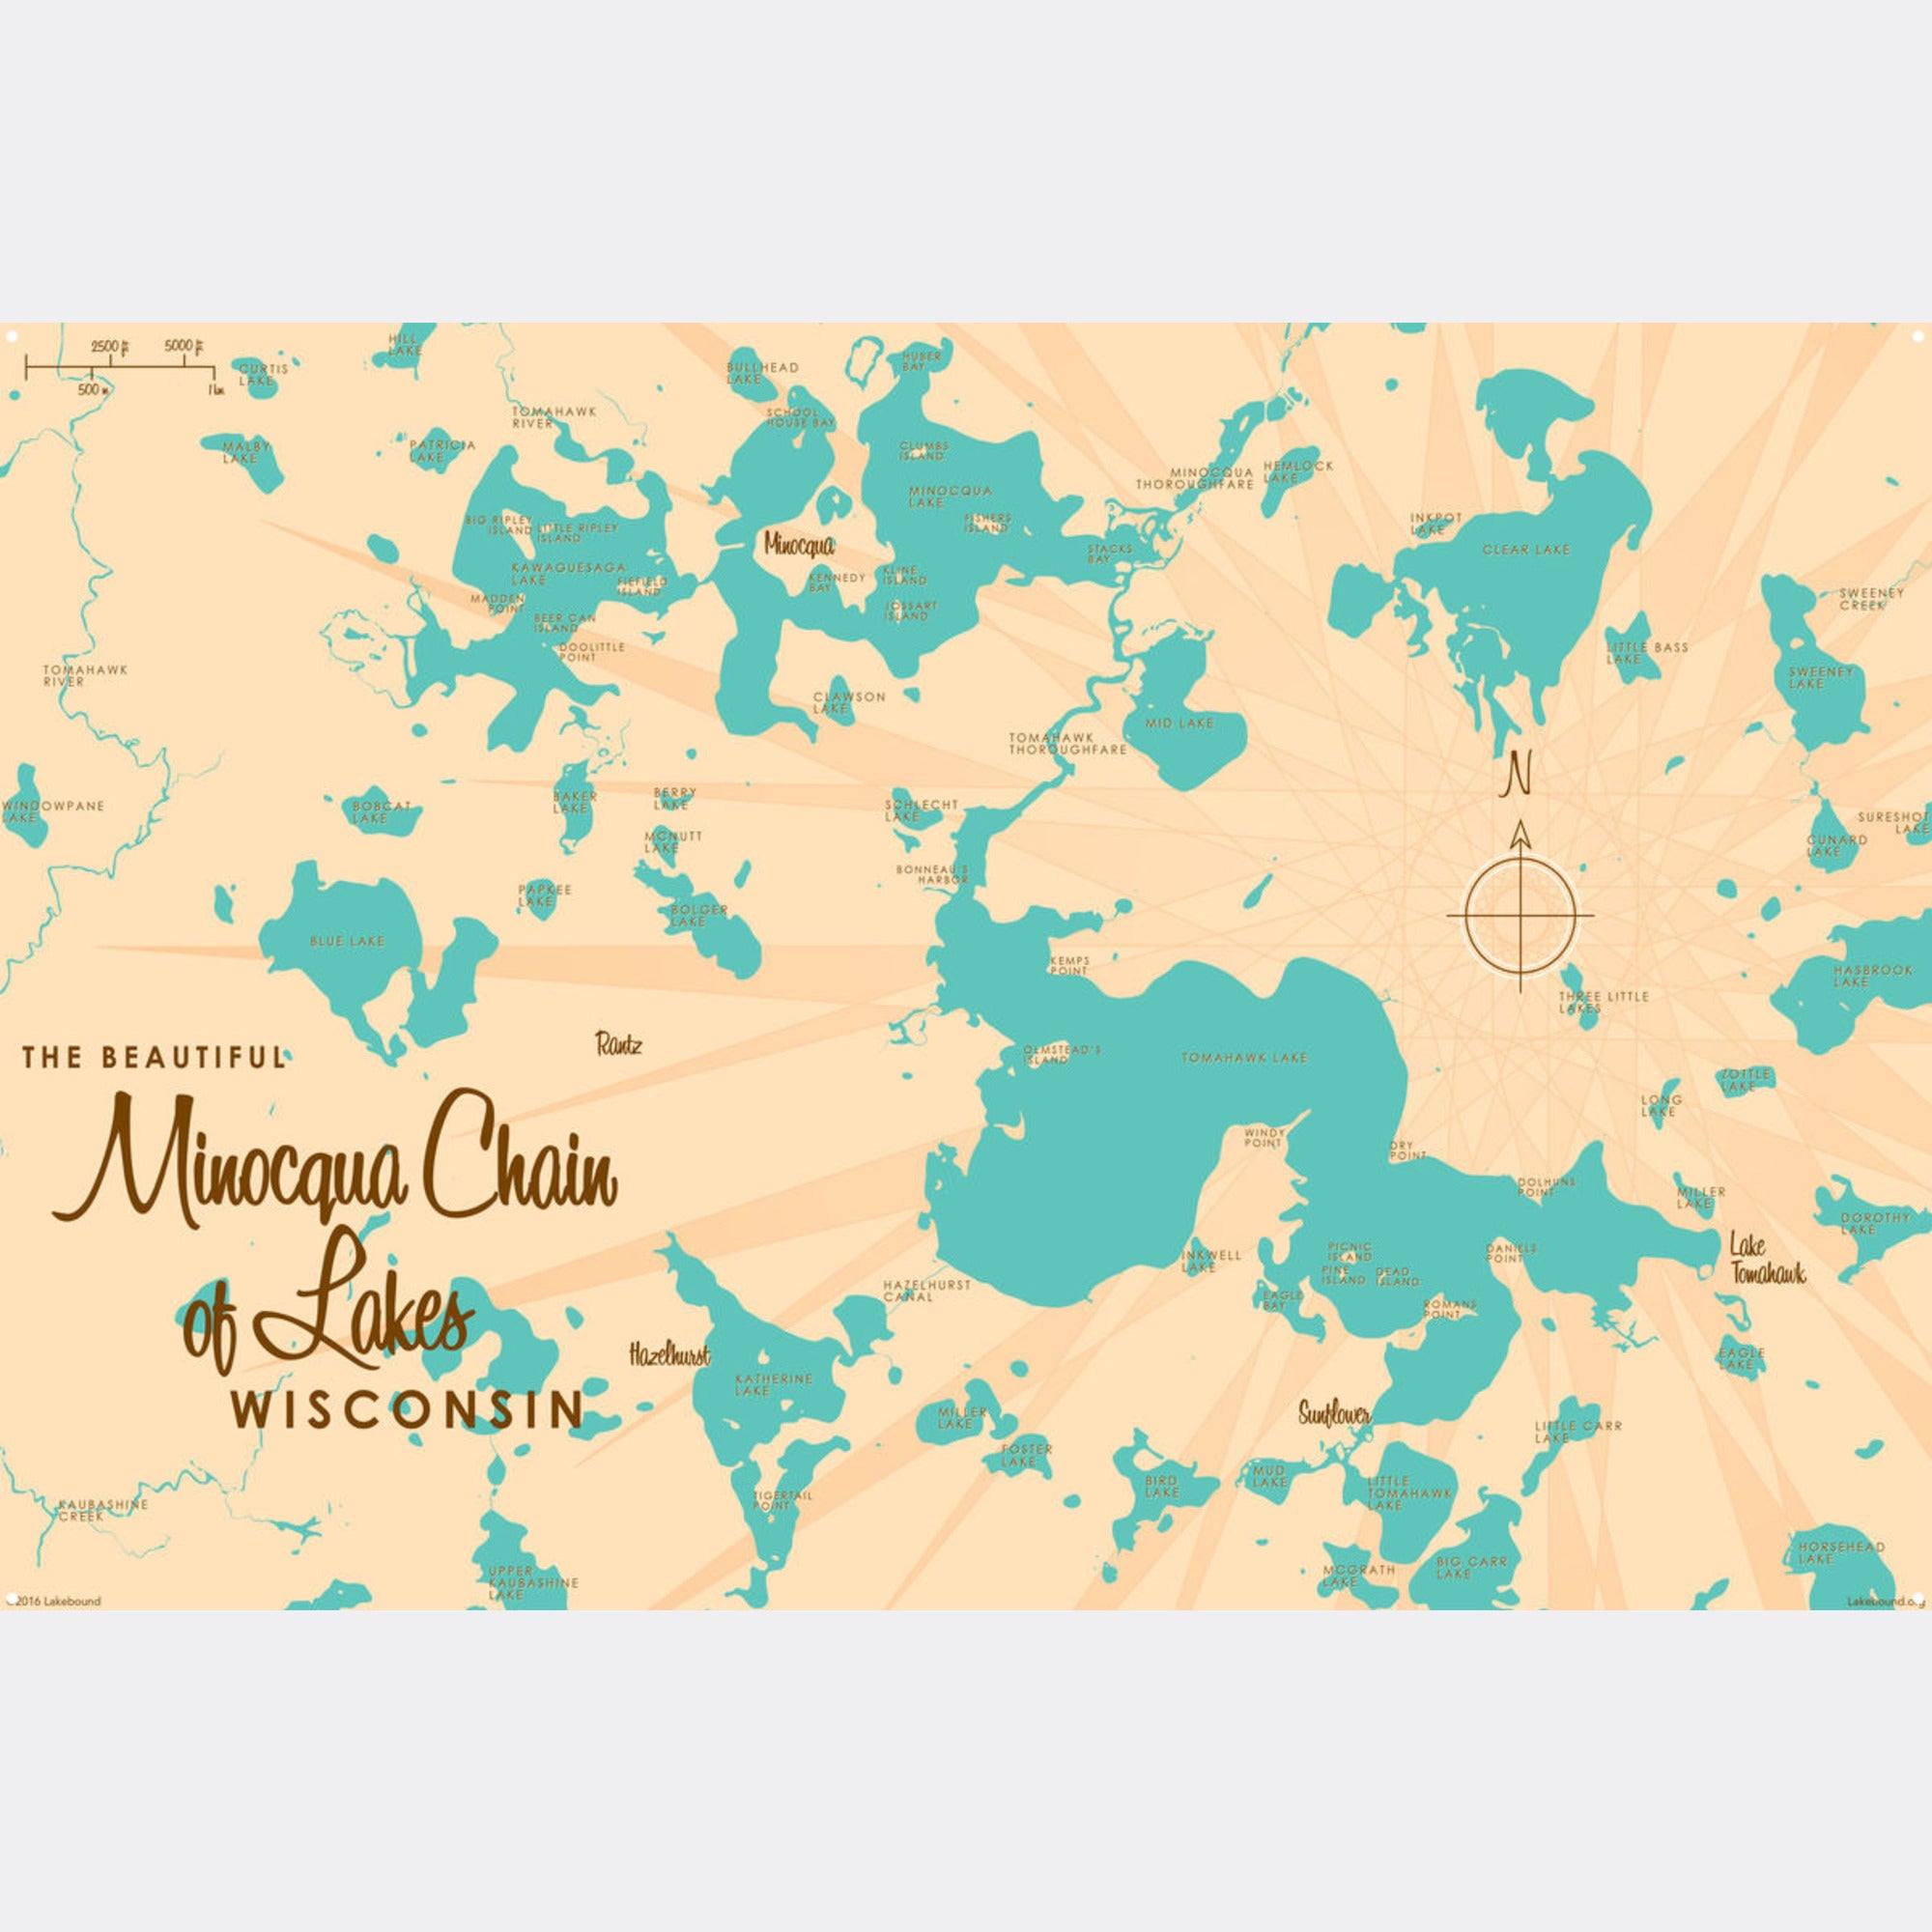 Minocqua Chain of Lakes Wisconsin, Metal Sign Map Art